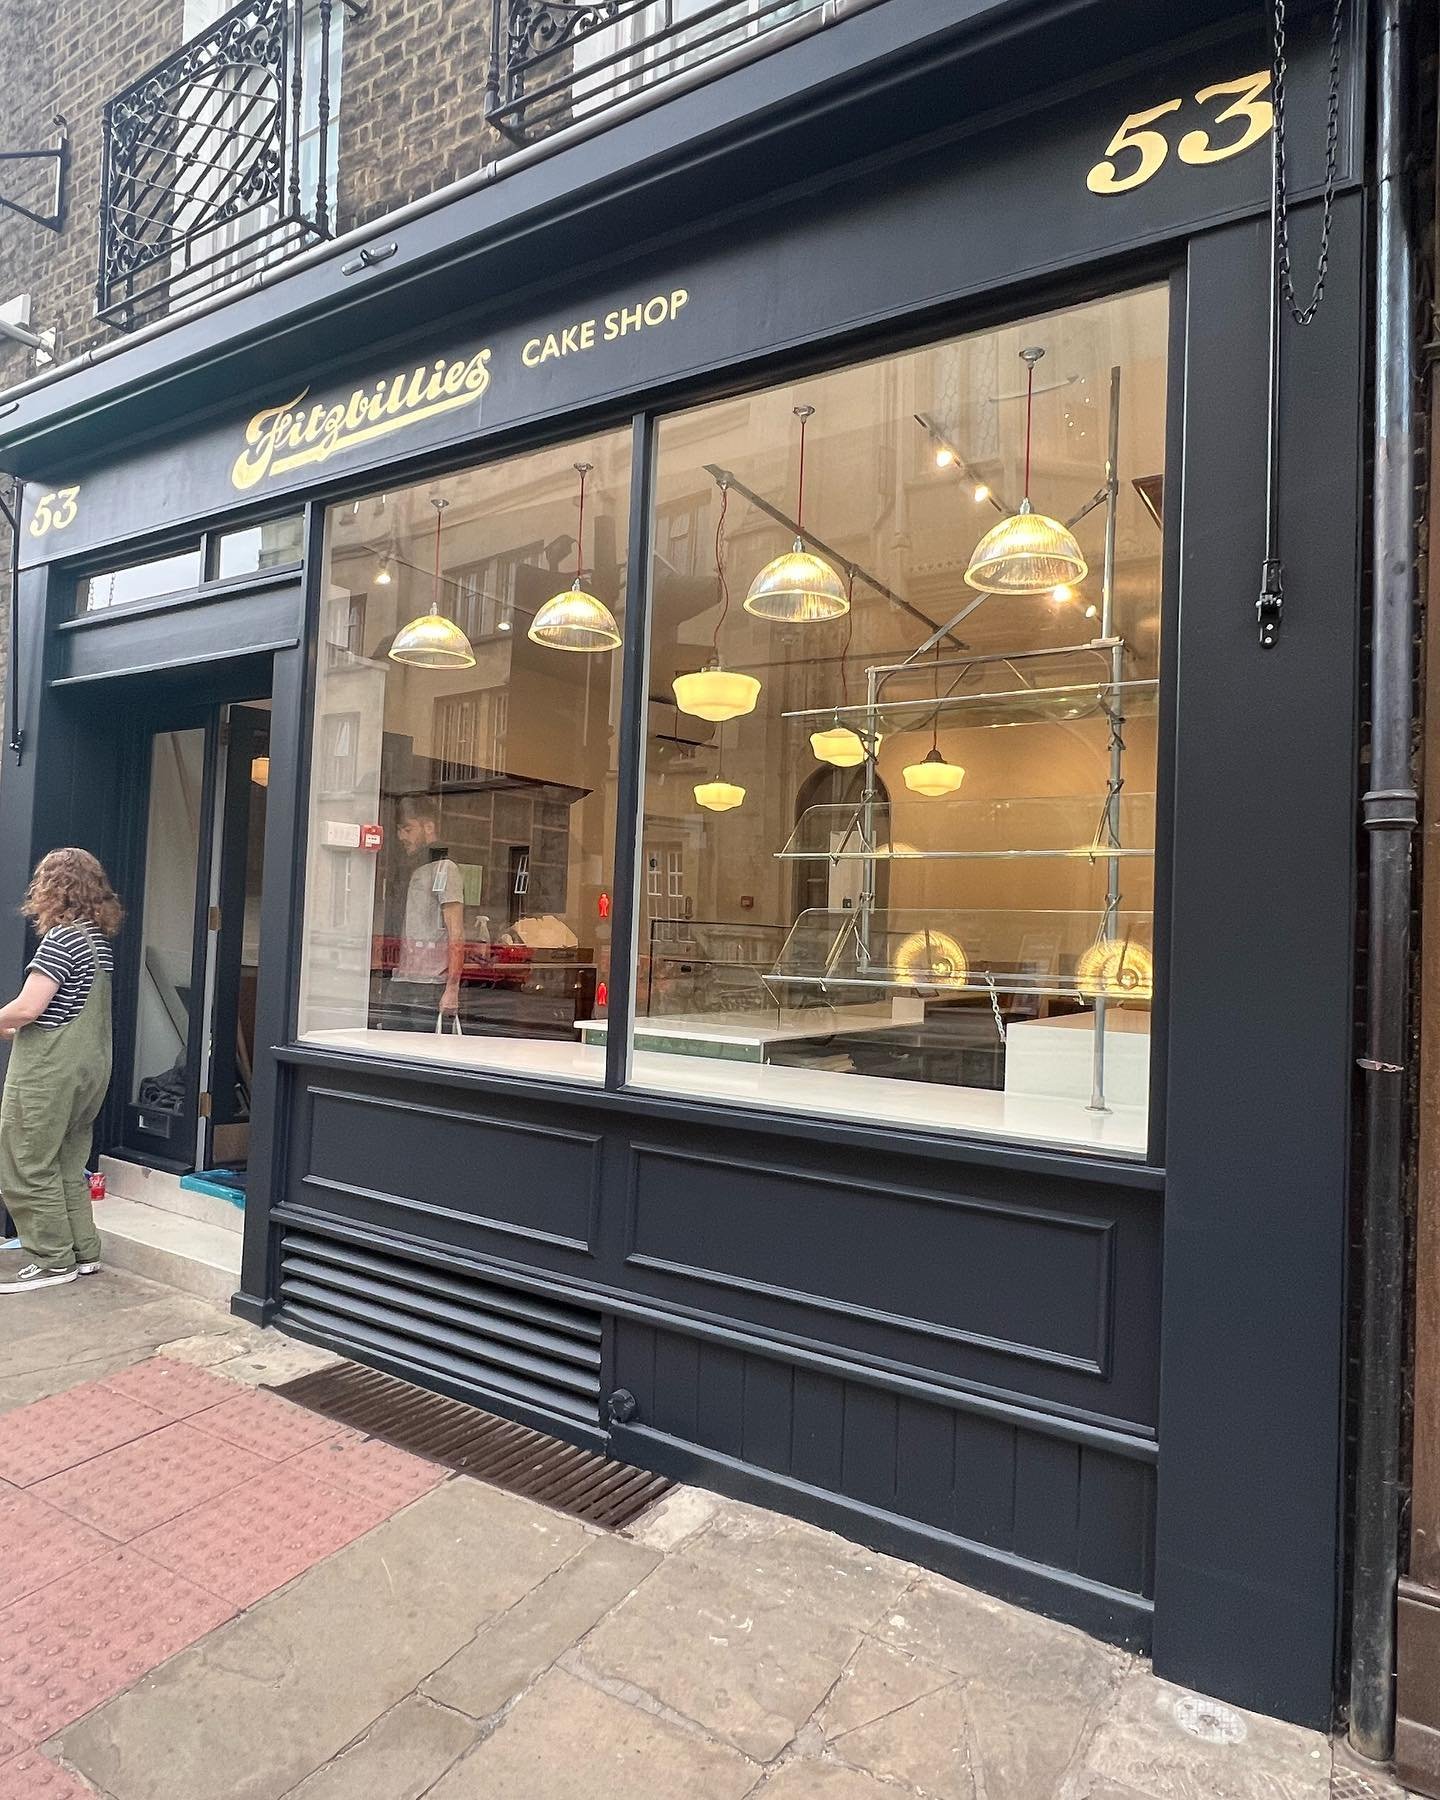 What a great privilege to create a little bit of history working on @fitzbillies new cake shop&hellip;

As always working along side @lociinteriors 
@cb1plumbingandheating 
@cb1buildingandcarpentry2&hellip;.. onto the next one now at kings parade

#c